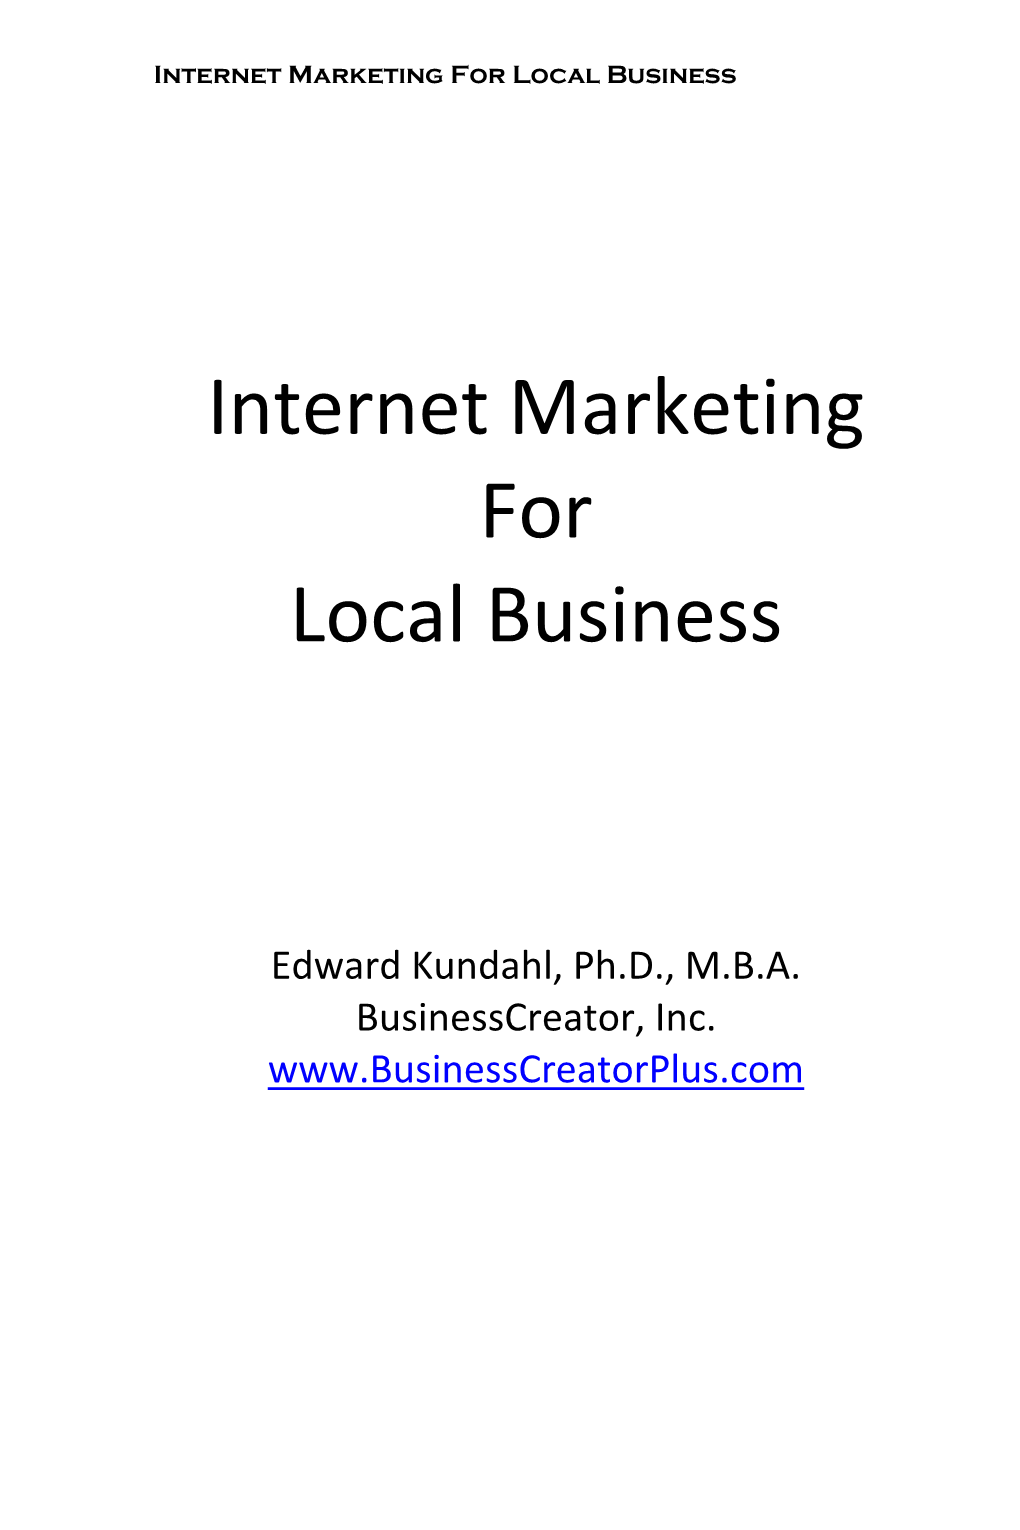 Internet Marketing for Local Business